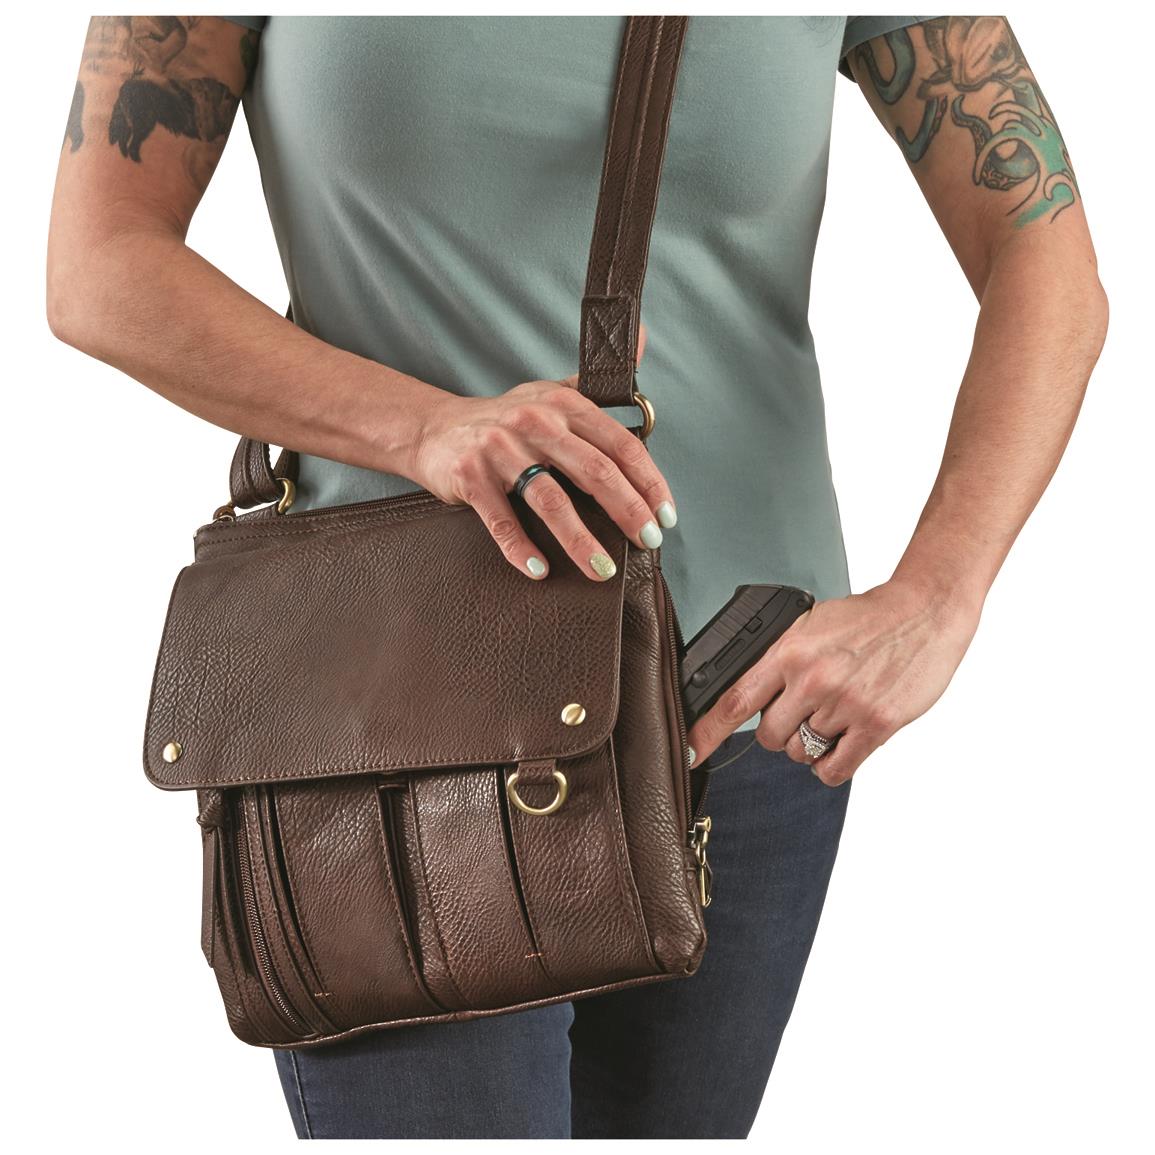 Concealed Carry Crossbody Bags